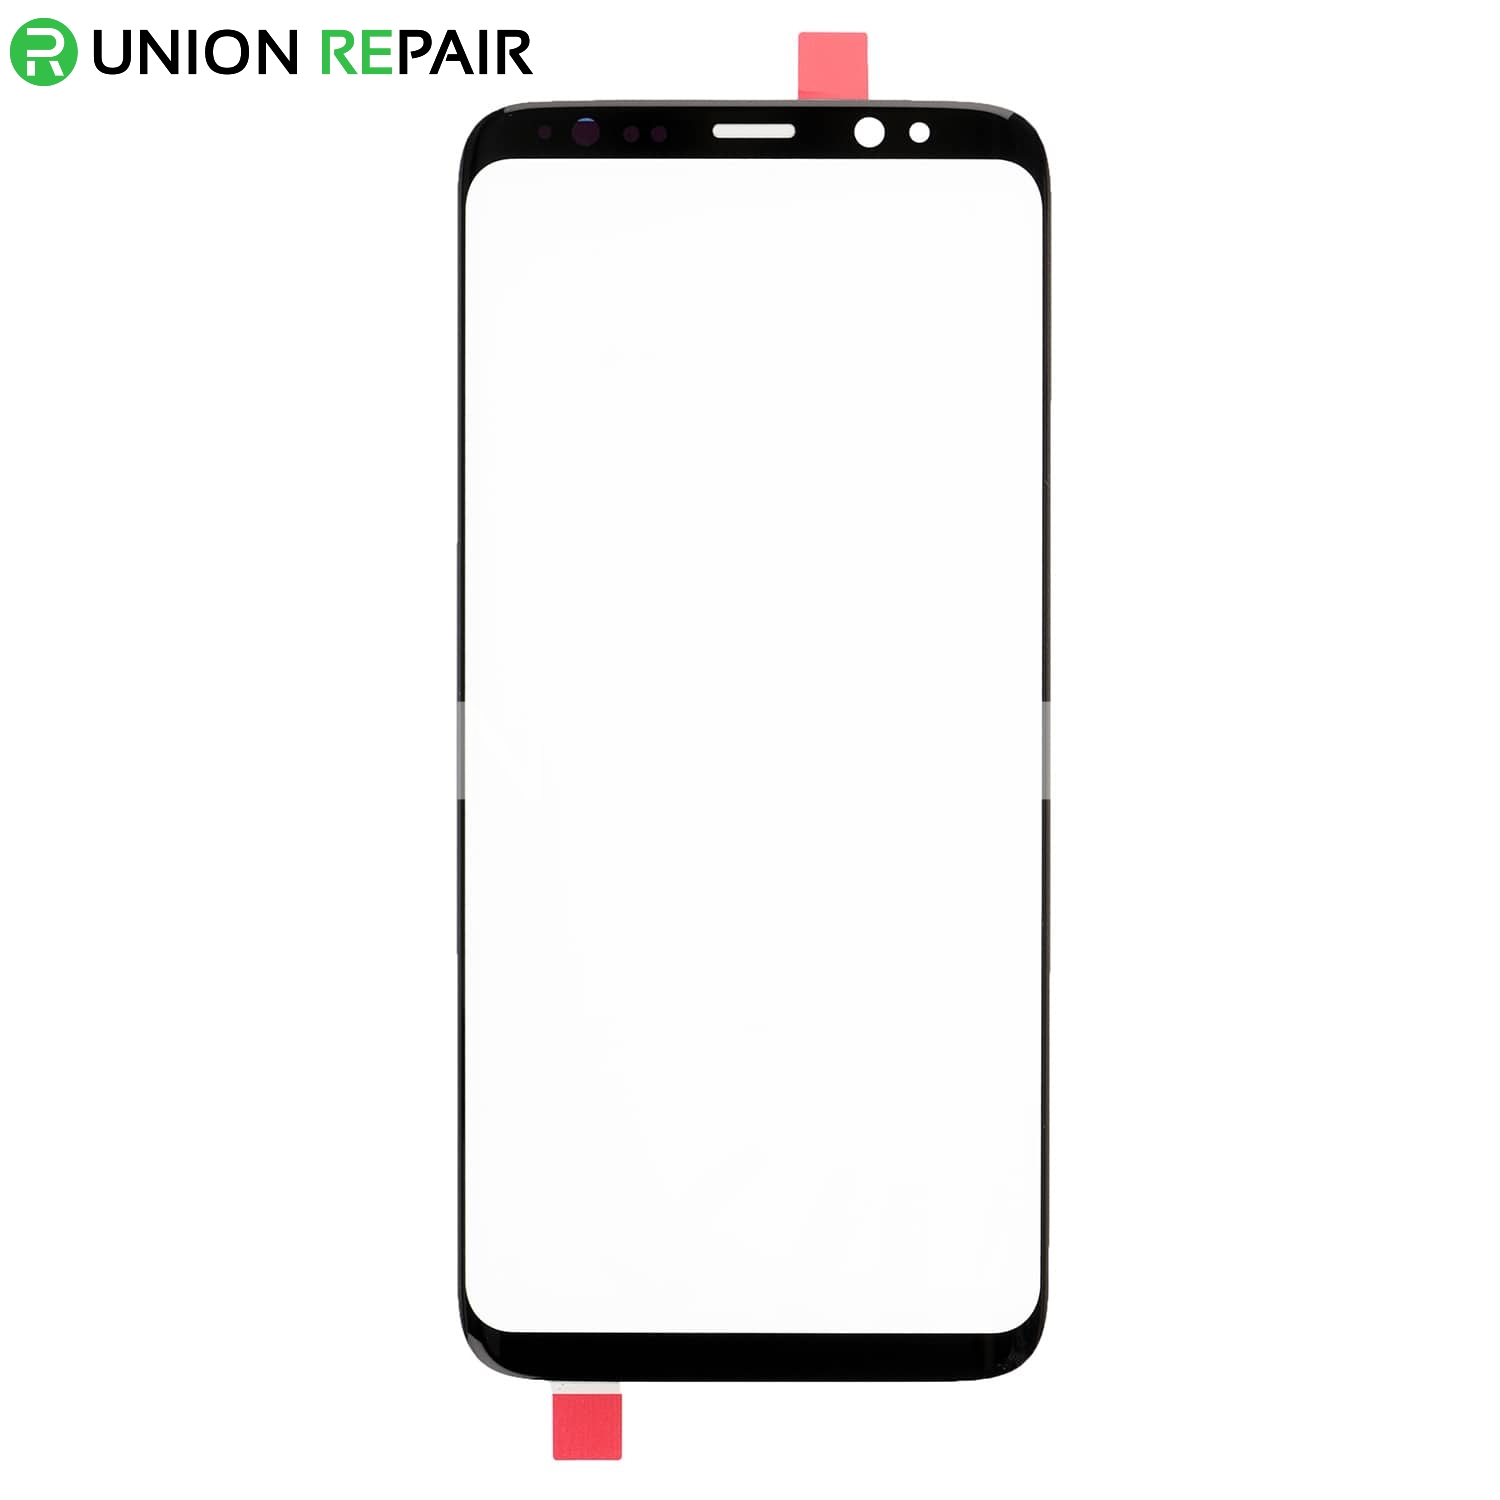 Replacement for Samsung Galaxy S8 Plus SM-G955 Front Glass Lens - Black